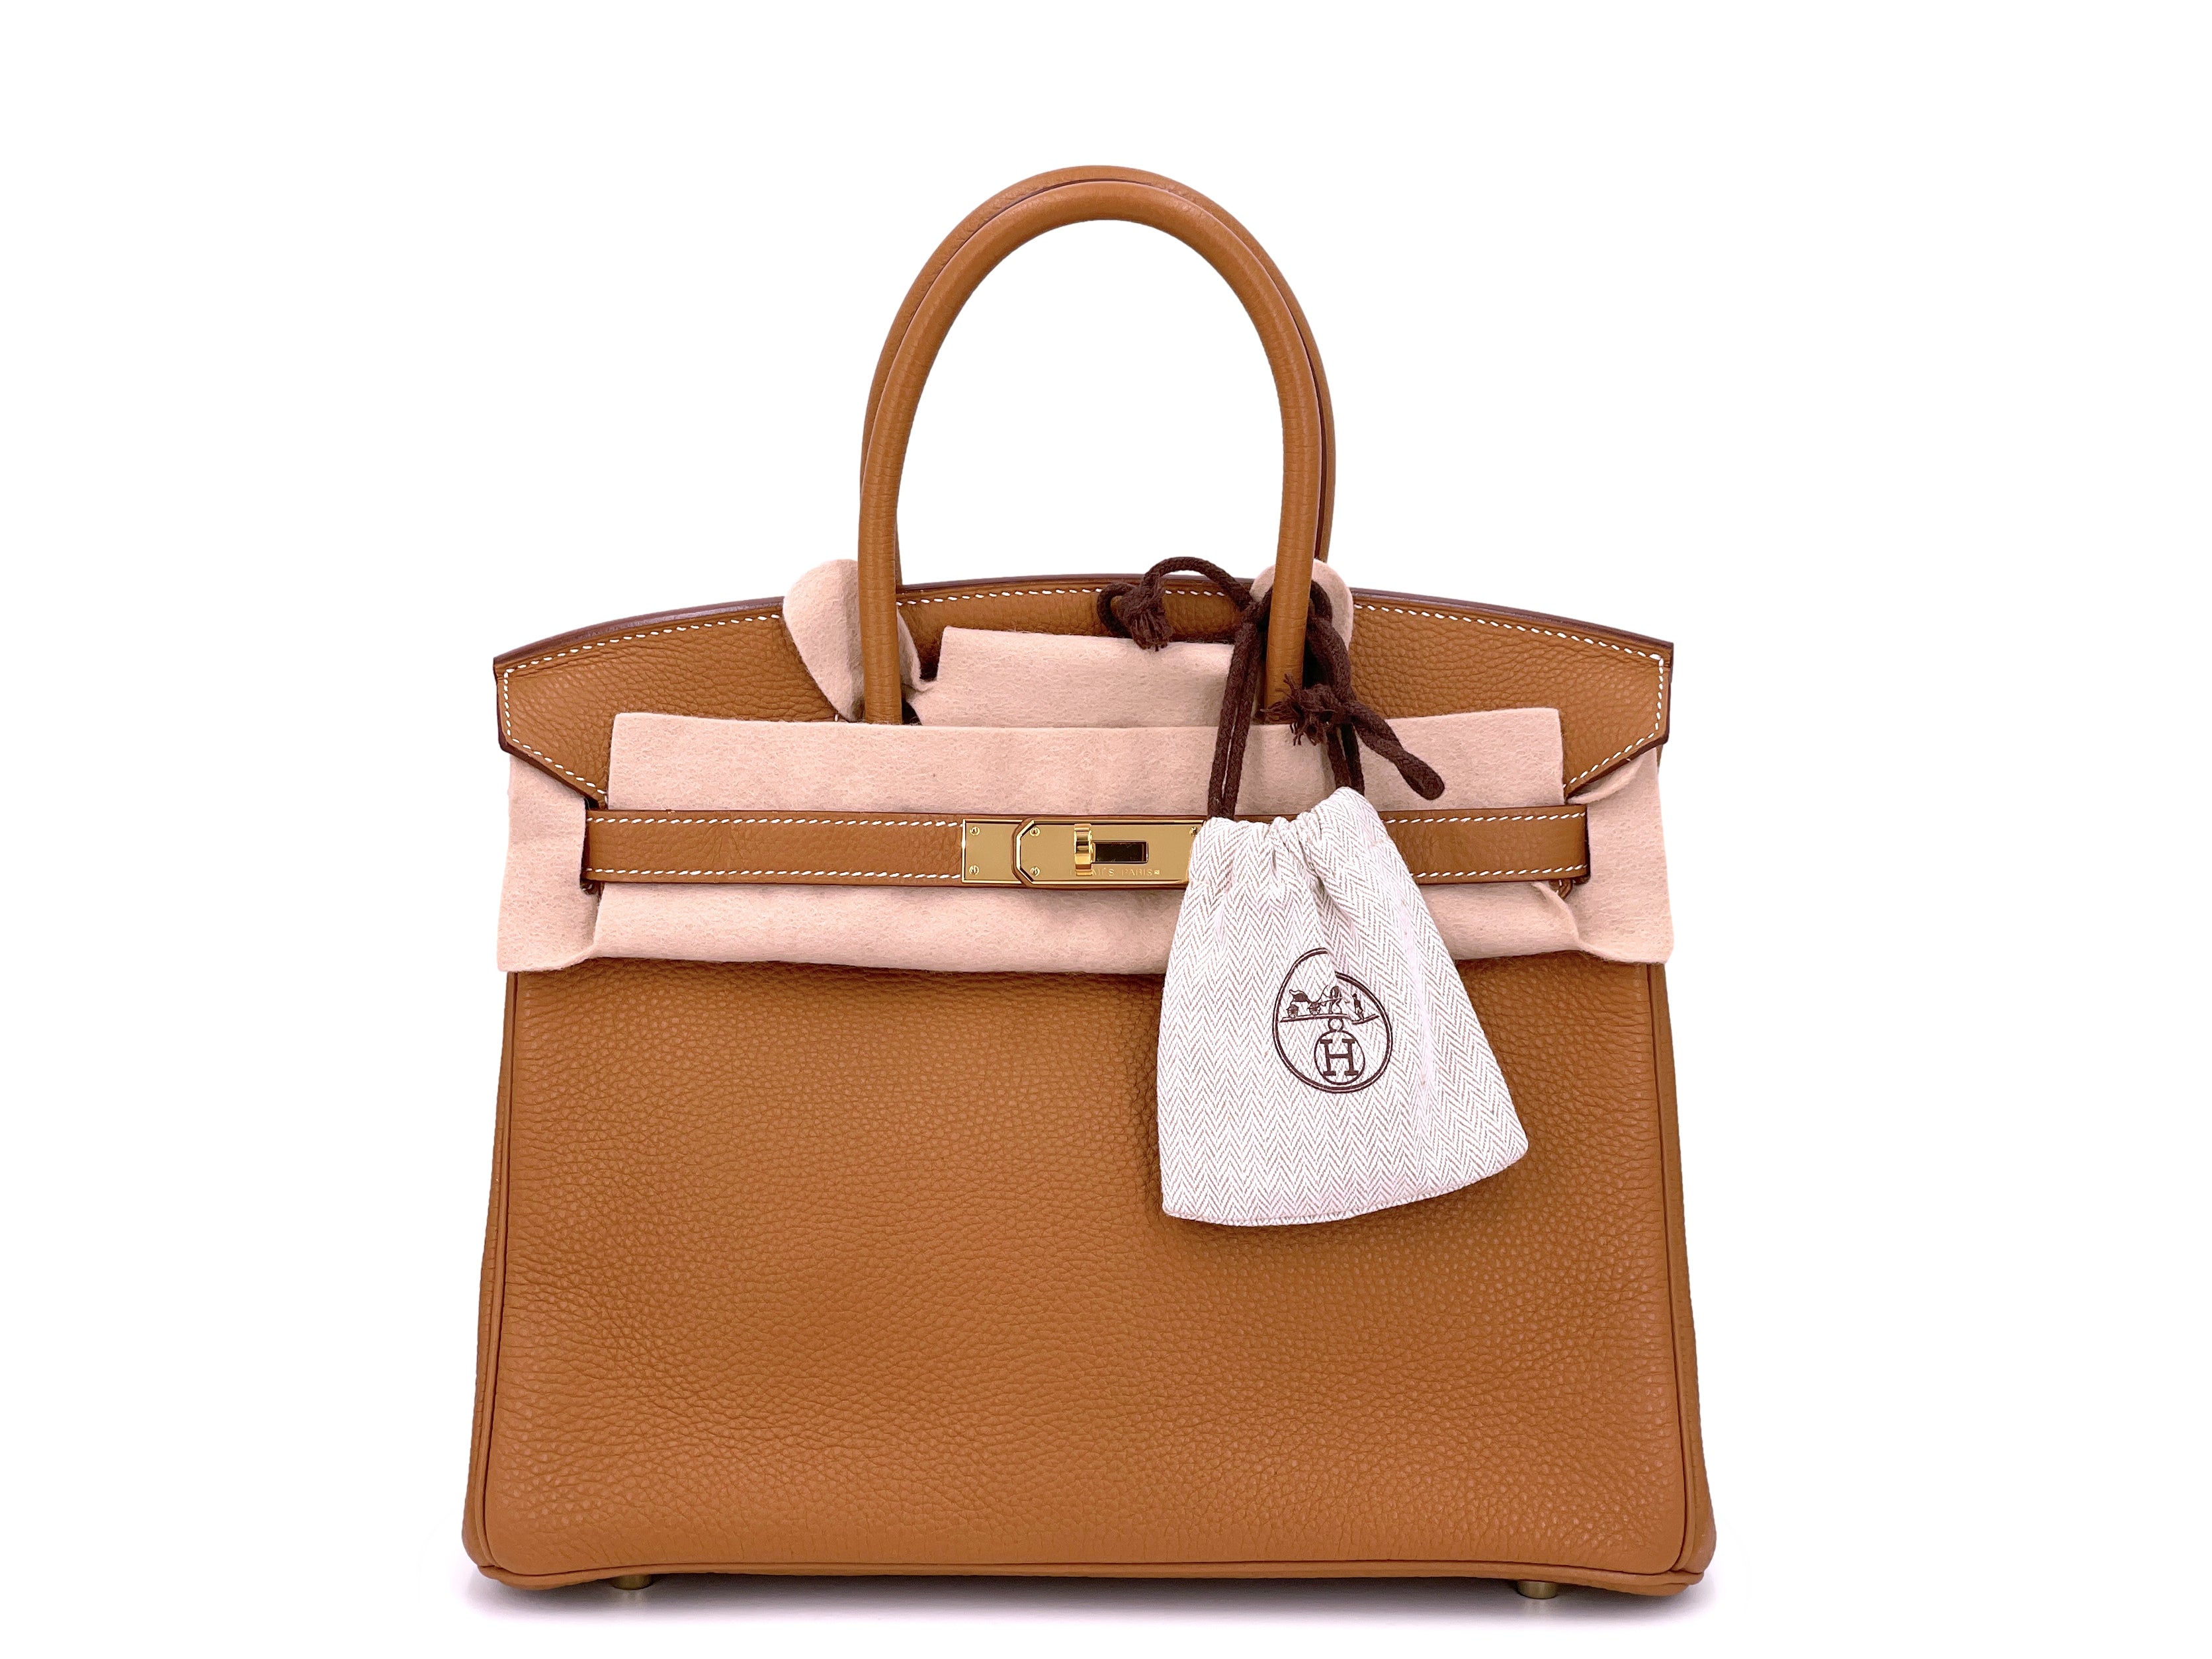 Shop HERMES Picotin Hermes Garden Party 30cm collection by Kenista